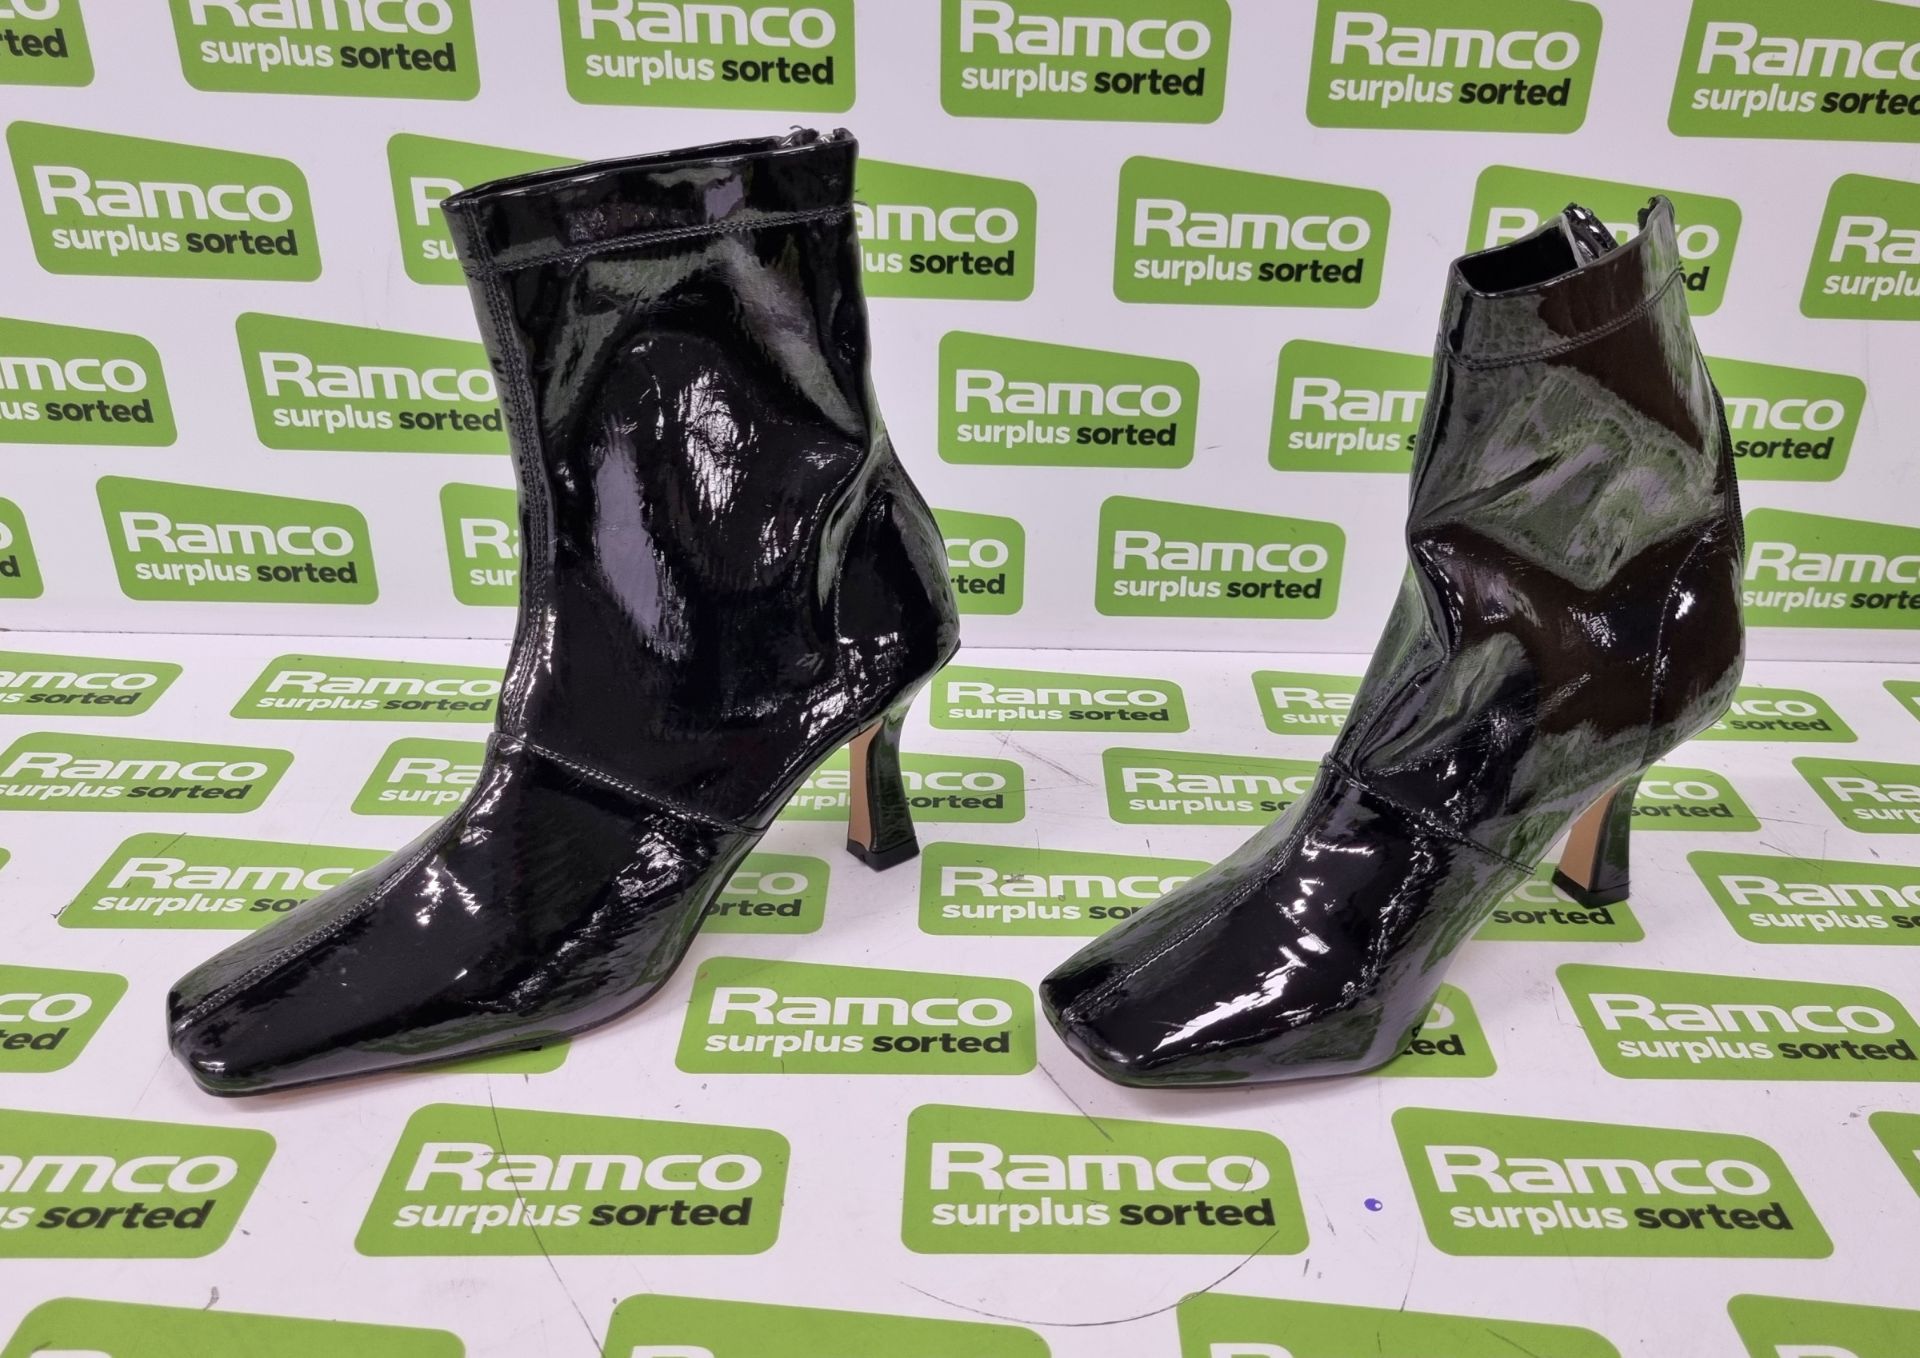 Outfits and boots worn by (or spares for) Rita Ora's backing dancers during her medley performance - Bild 22 aus 30